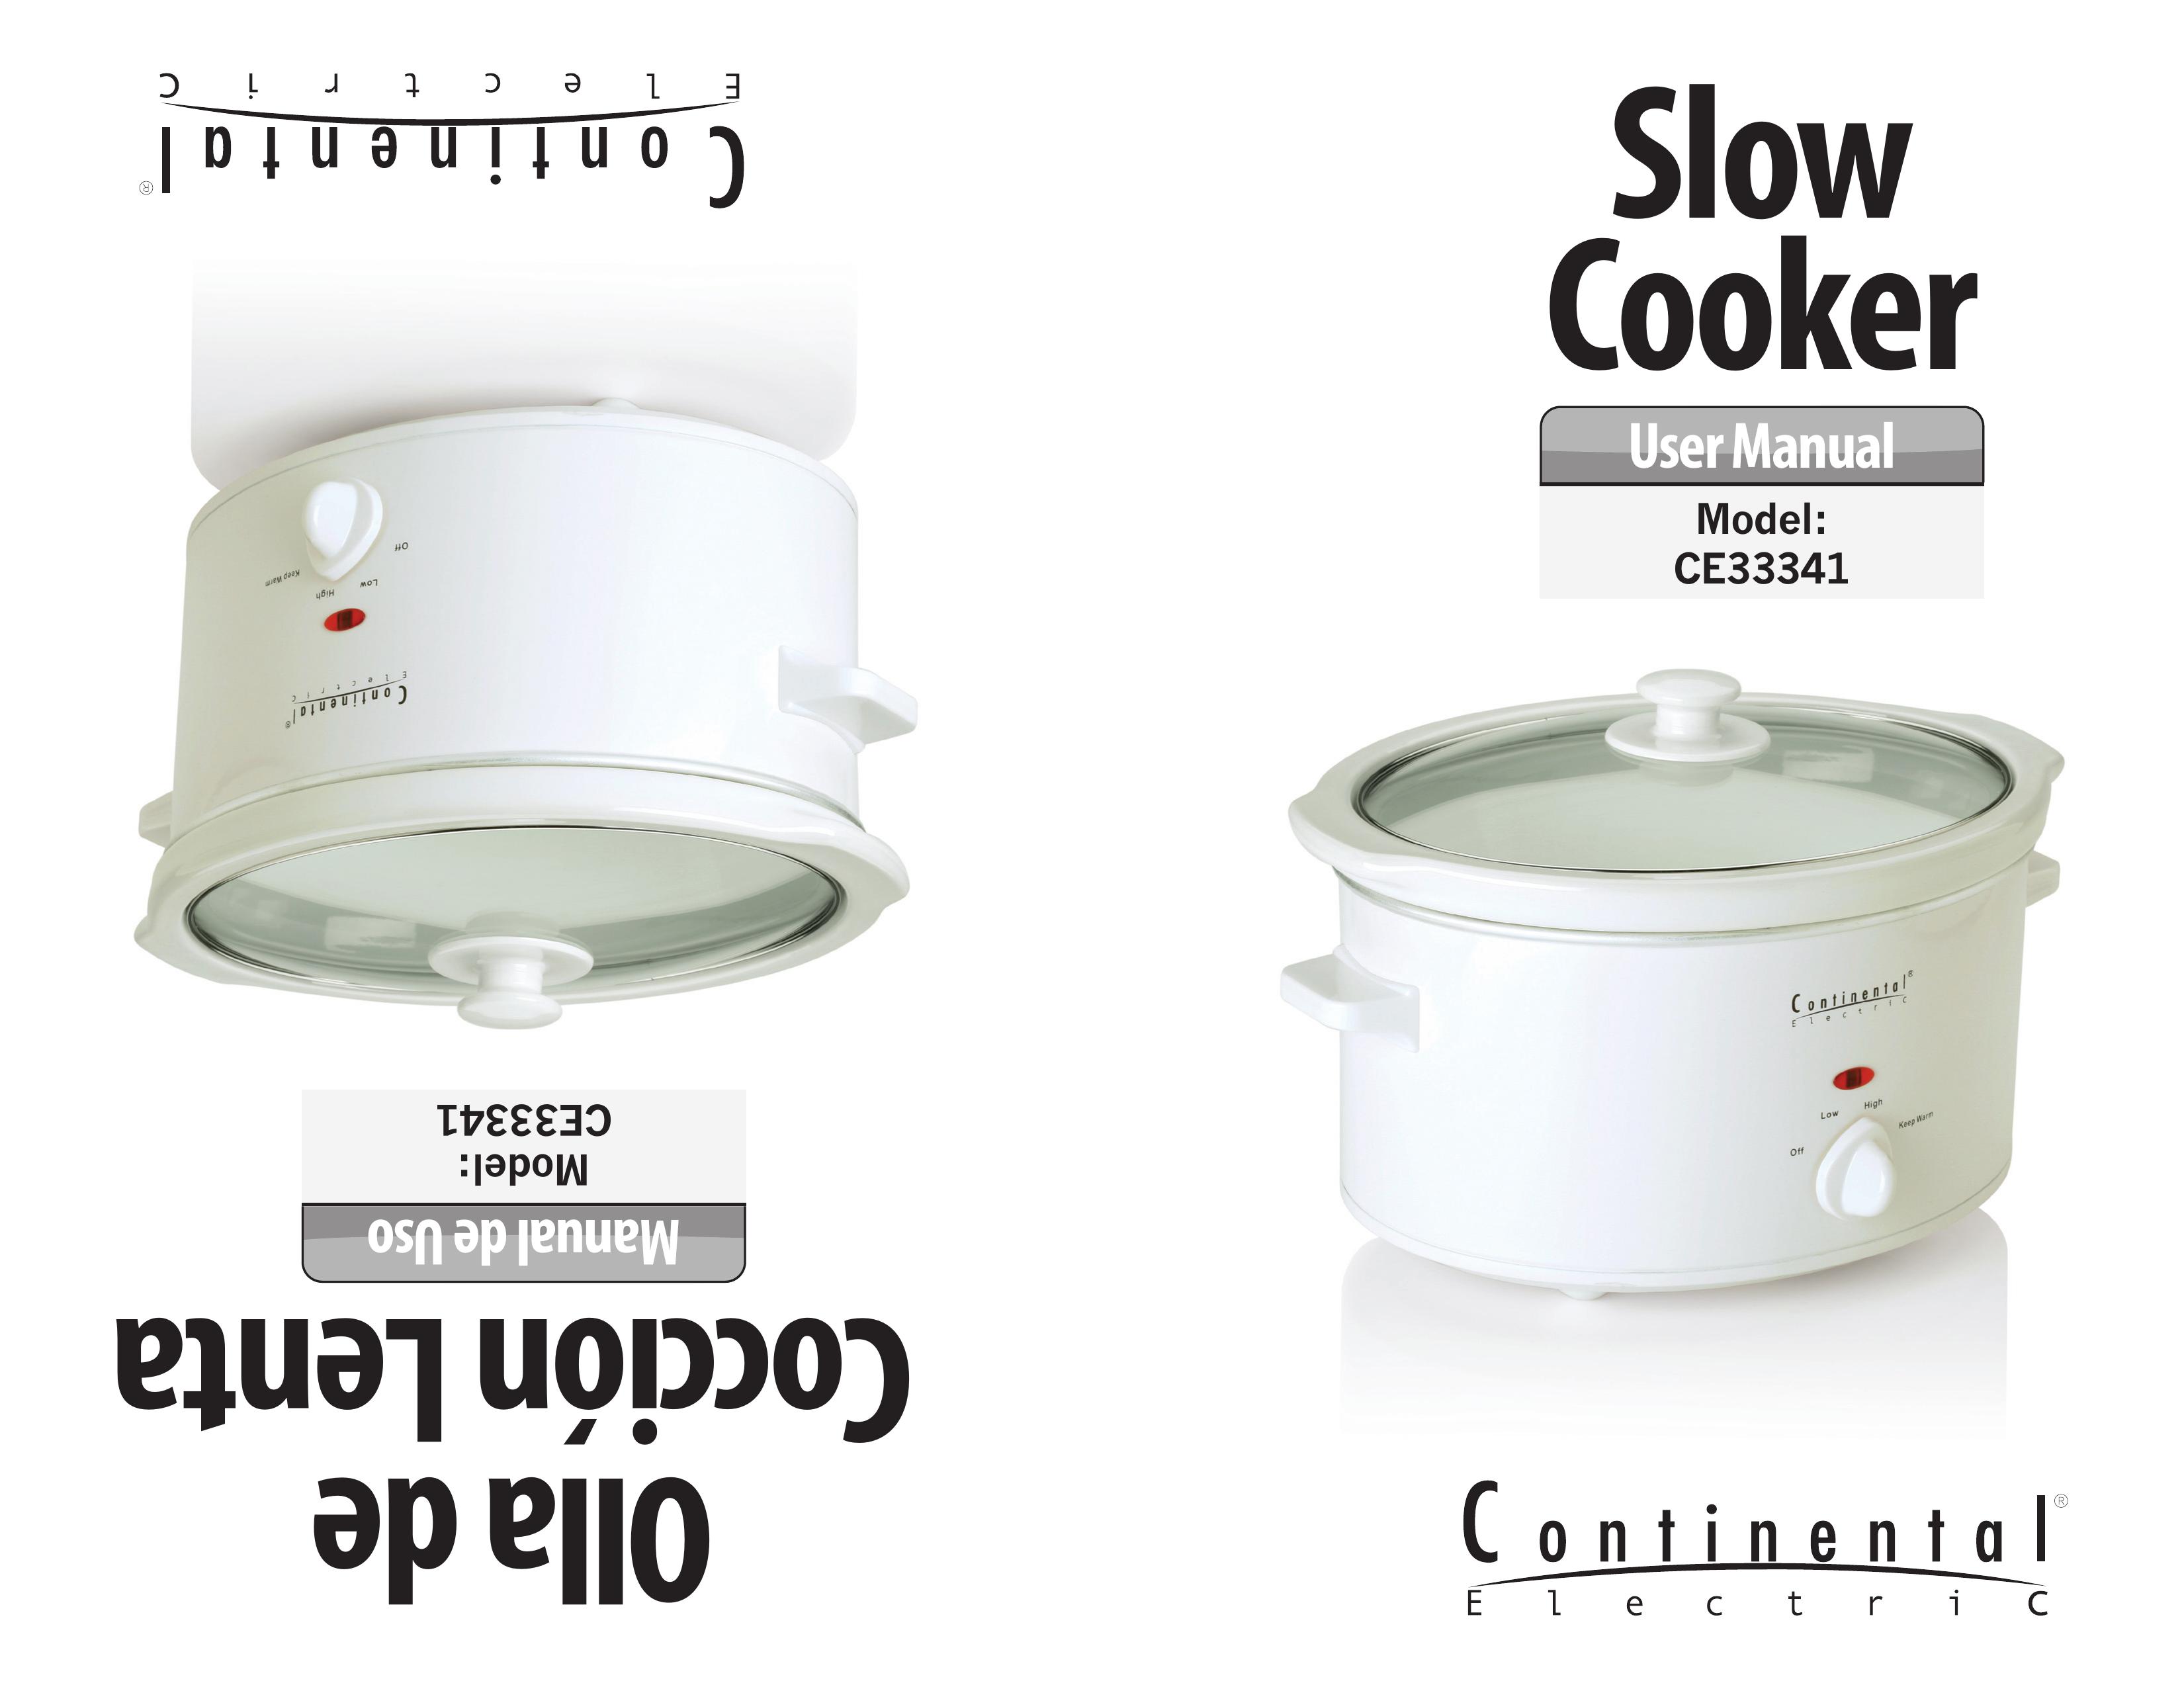 Continental Electric CE33341 Slow Cooker User Manual